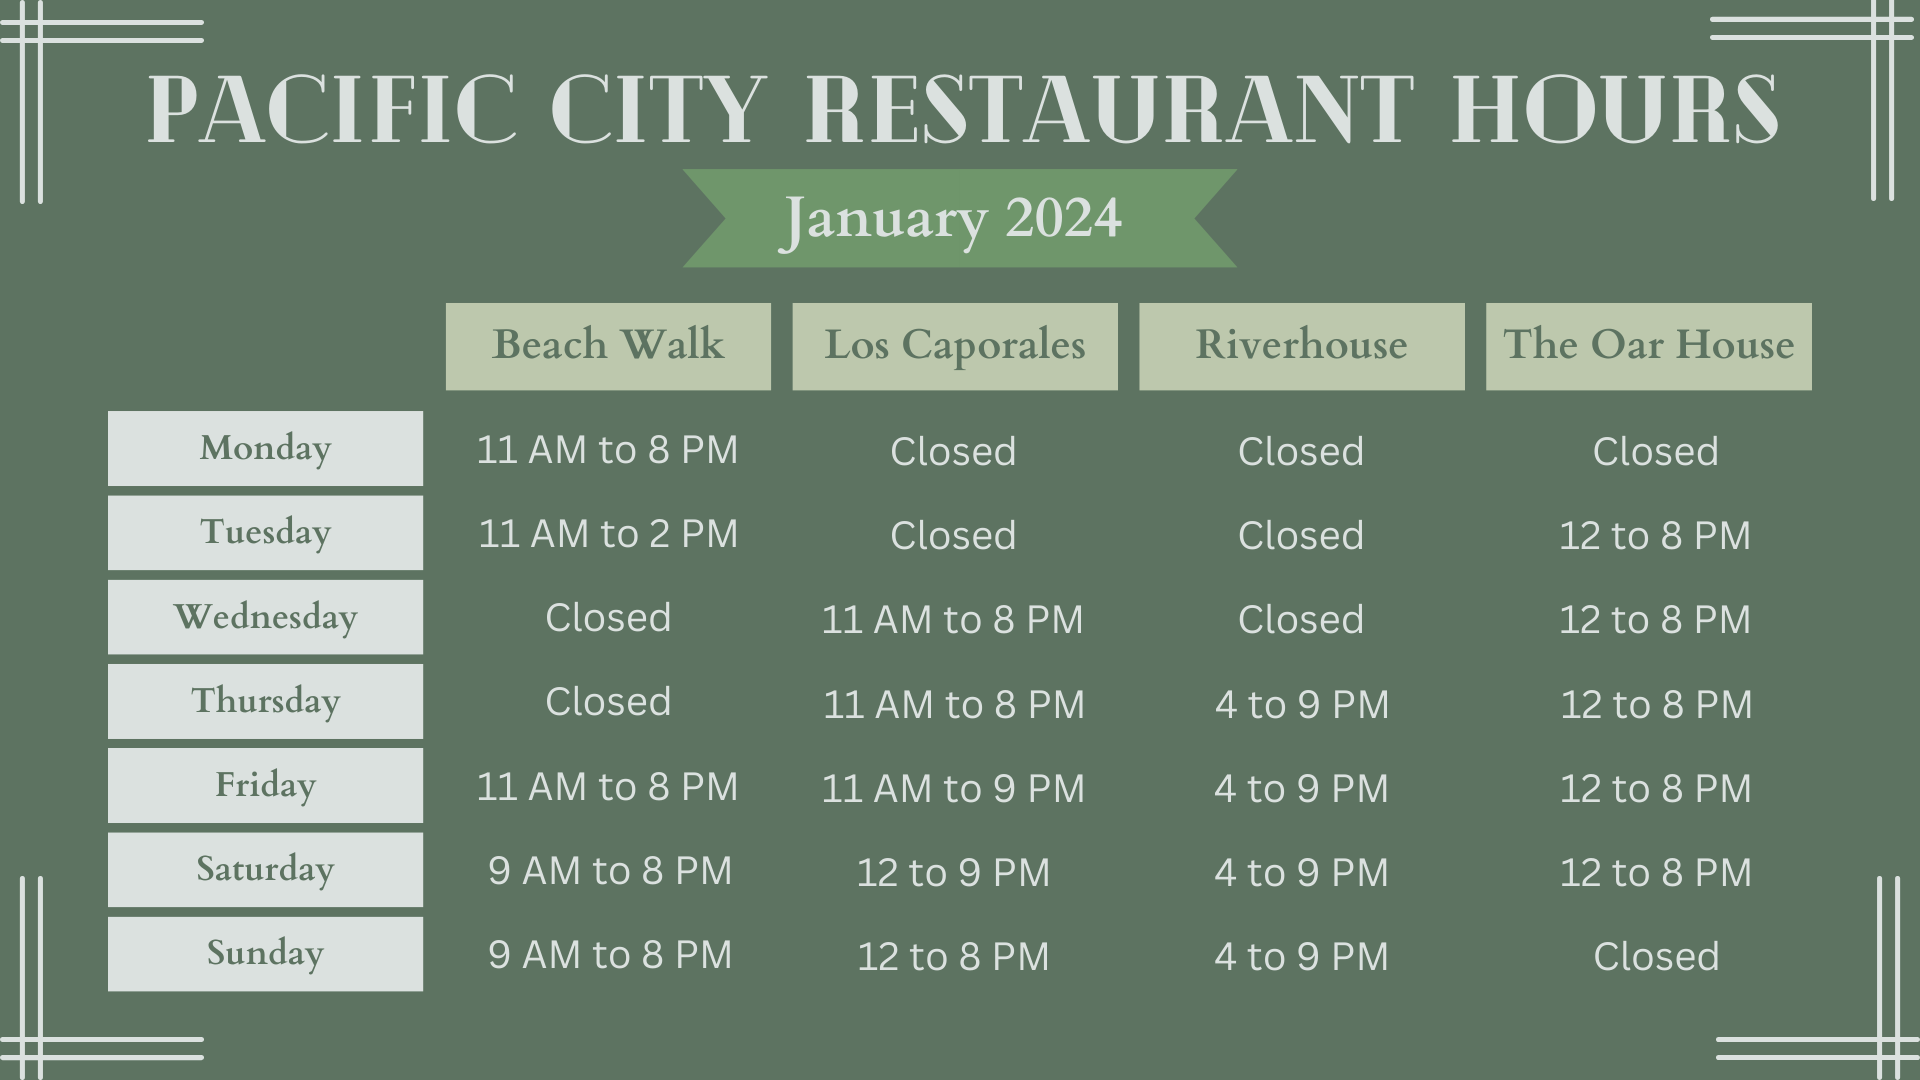 Pacific City Restaurant Hours – January 2024